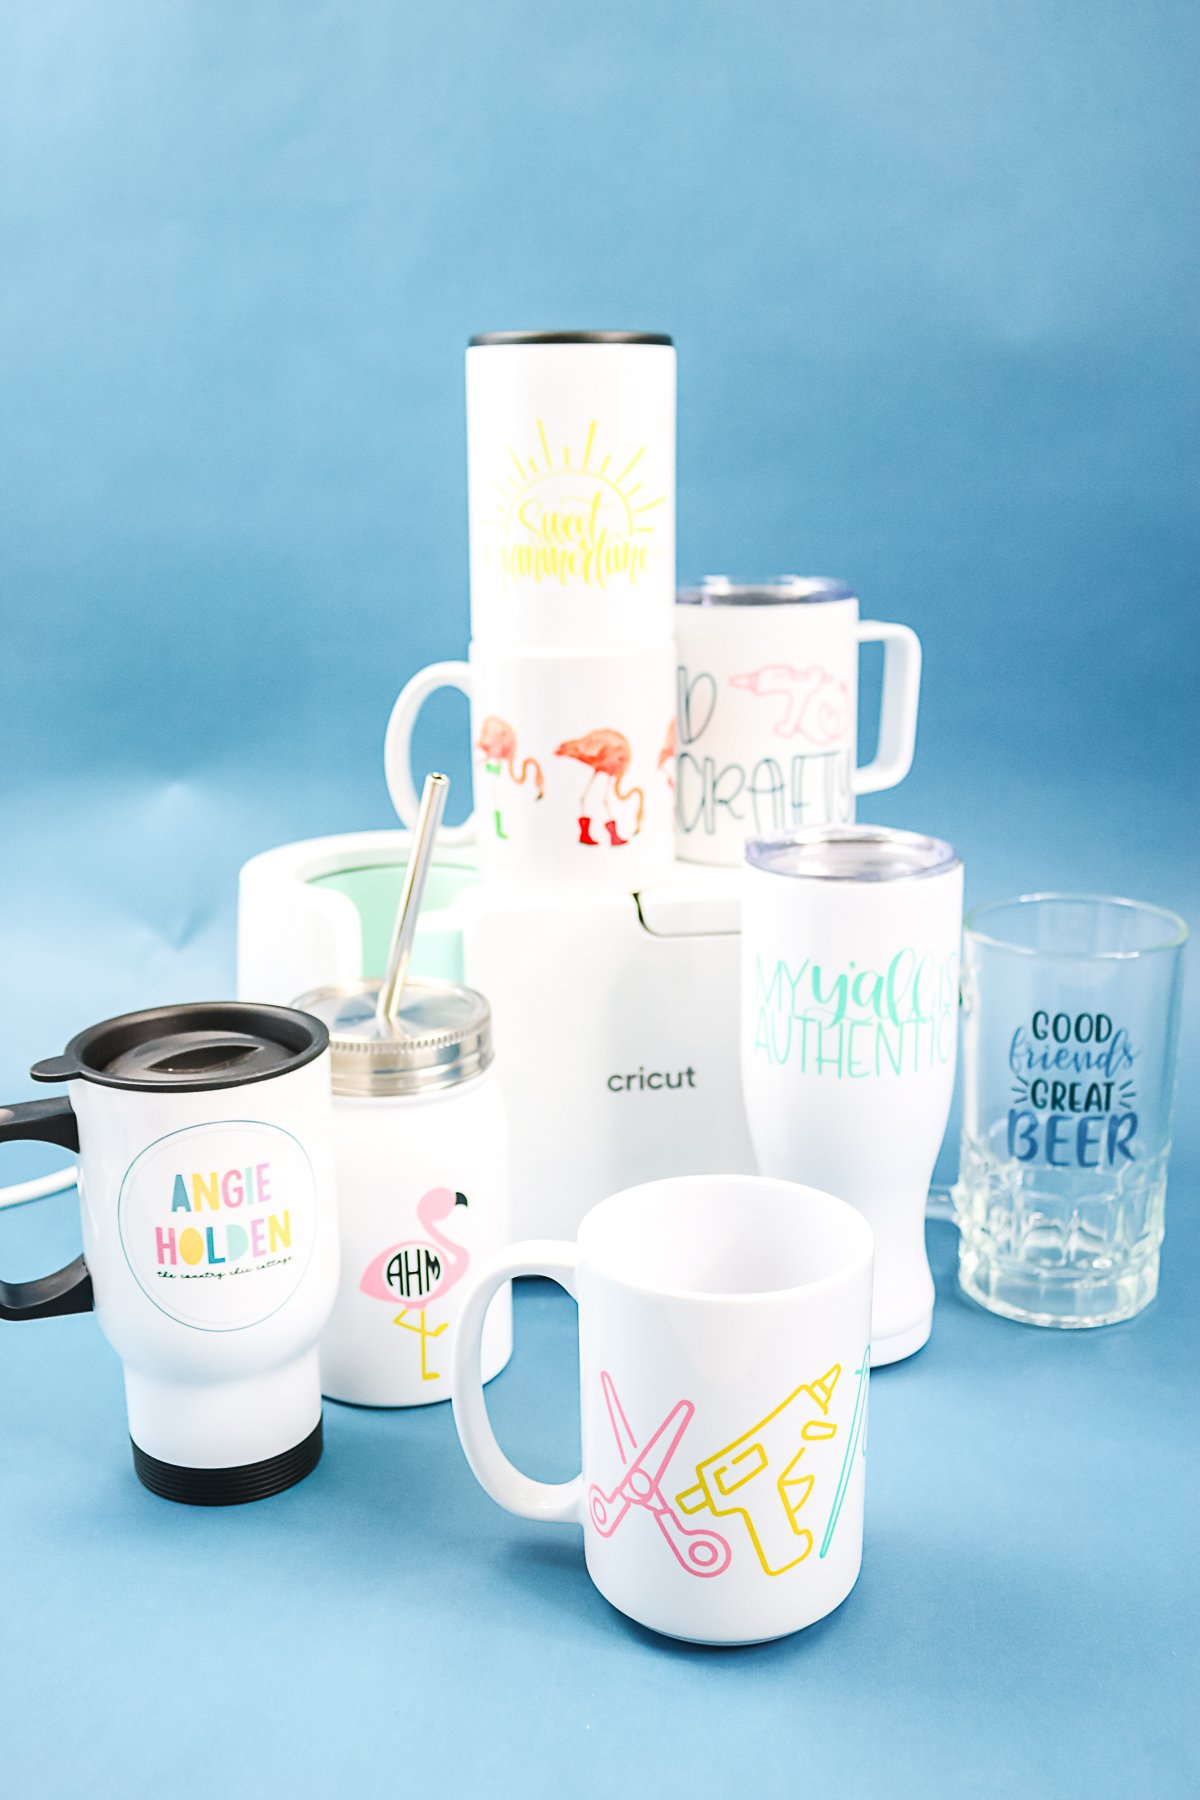 https://www.thecountrychiccottage.net/wp-content/uploads/2021/03/cricut-mug-press-other-mugs-and-tumblers-you-can-use-11-of-20.jpg